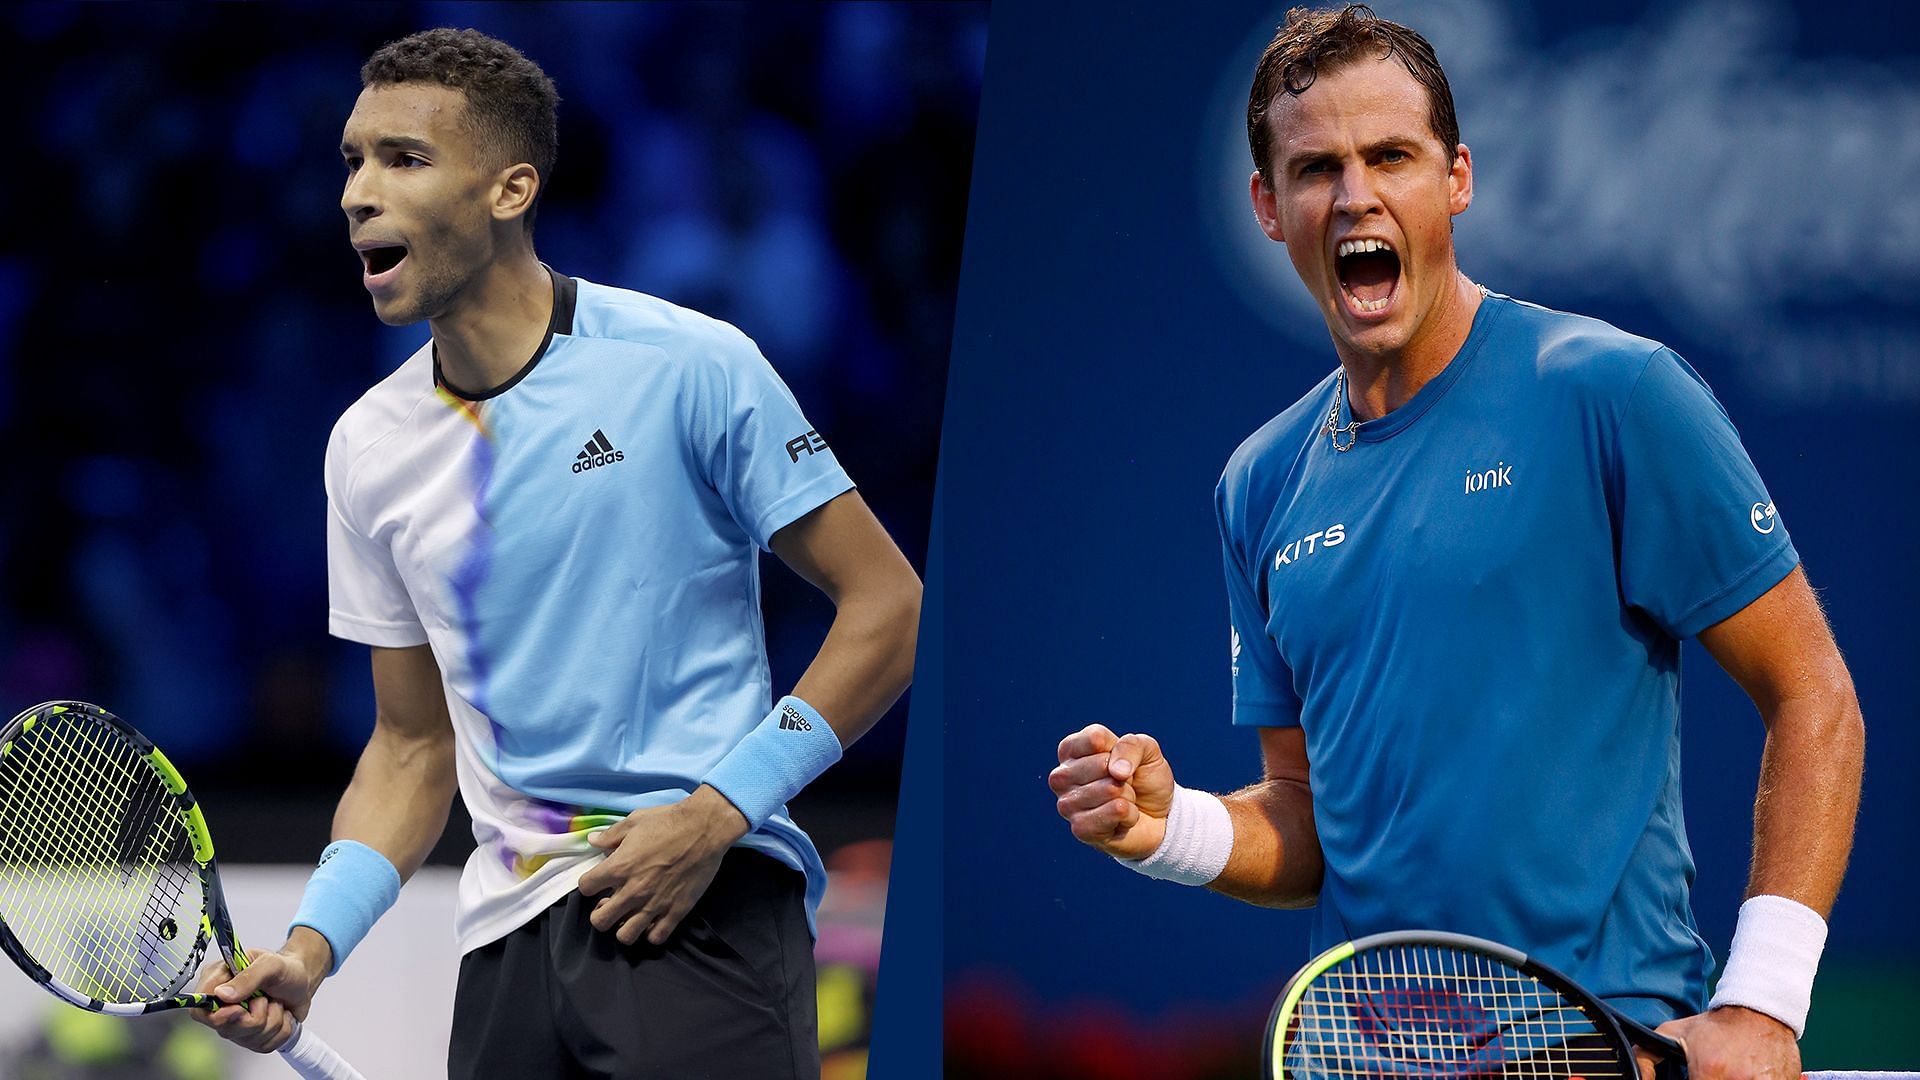 Felix Auger-Aliassime will face Vasek Pospisil in the first round of the Australian Open